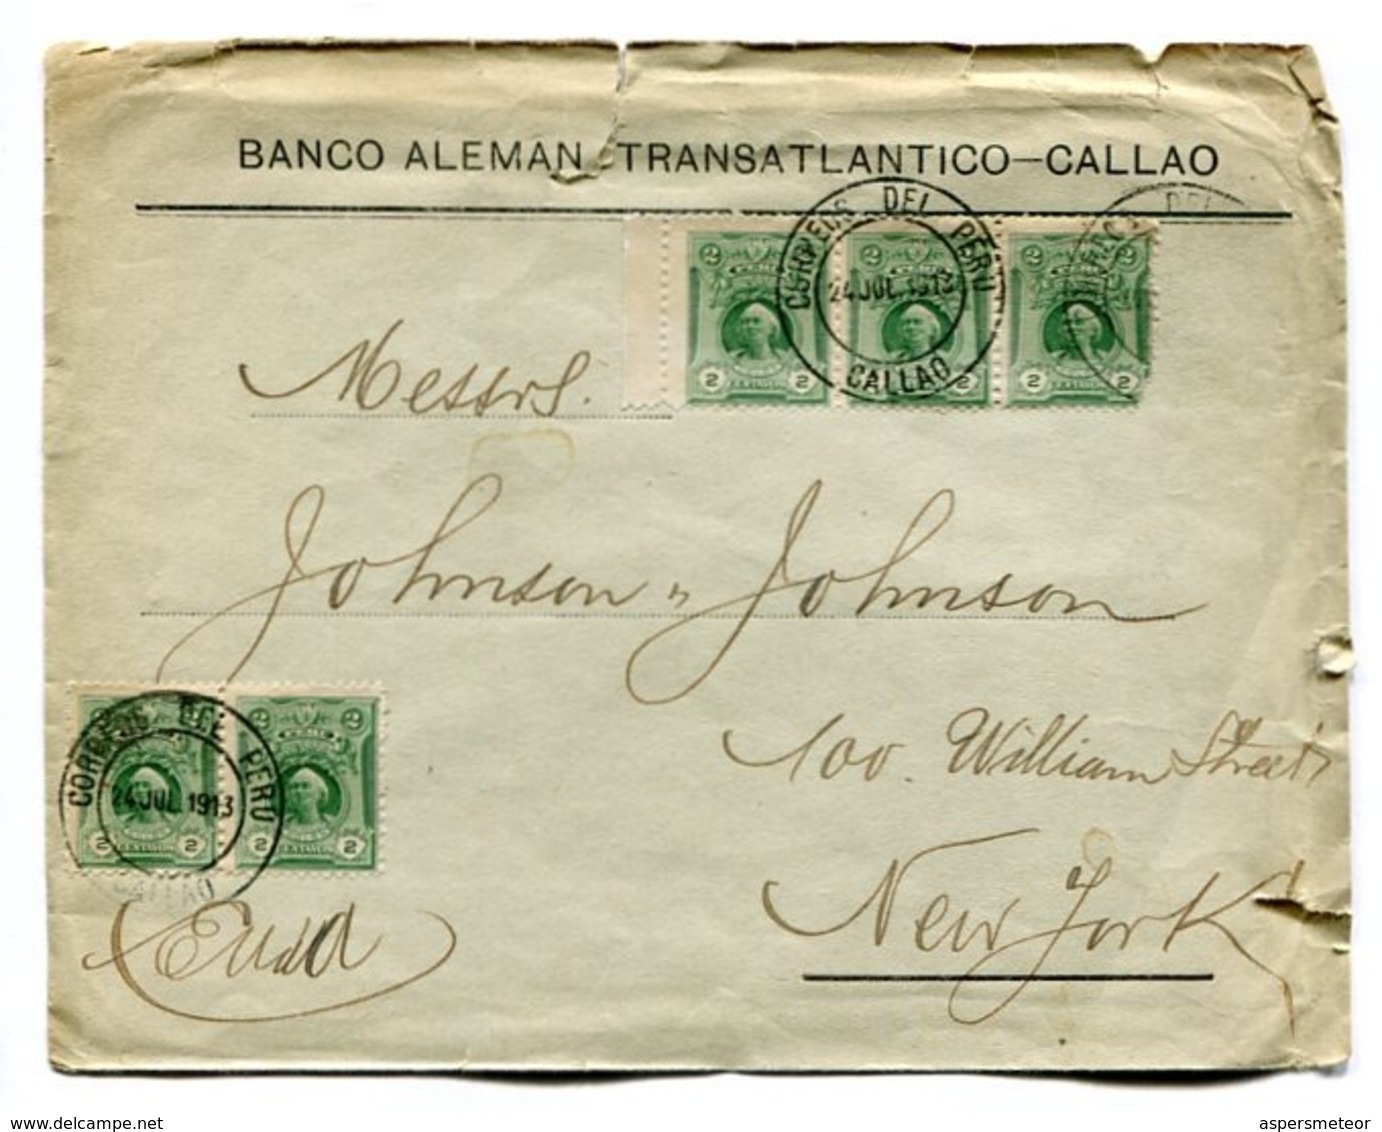 PERU COMMERCIAL COVER - CIRCULATED FROM "BANCO ALEMAN TRANSATLANTICO-CALLAO" TO NEW YORK, YEAR 1913 - LILHU - Perú